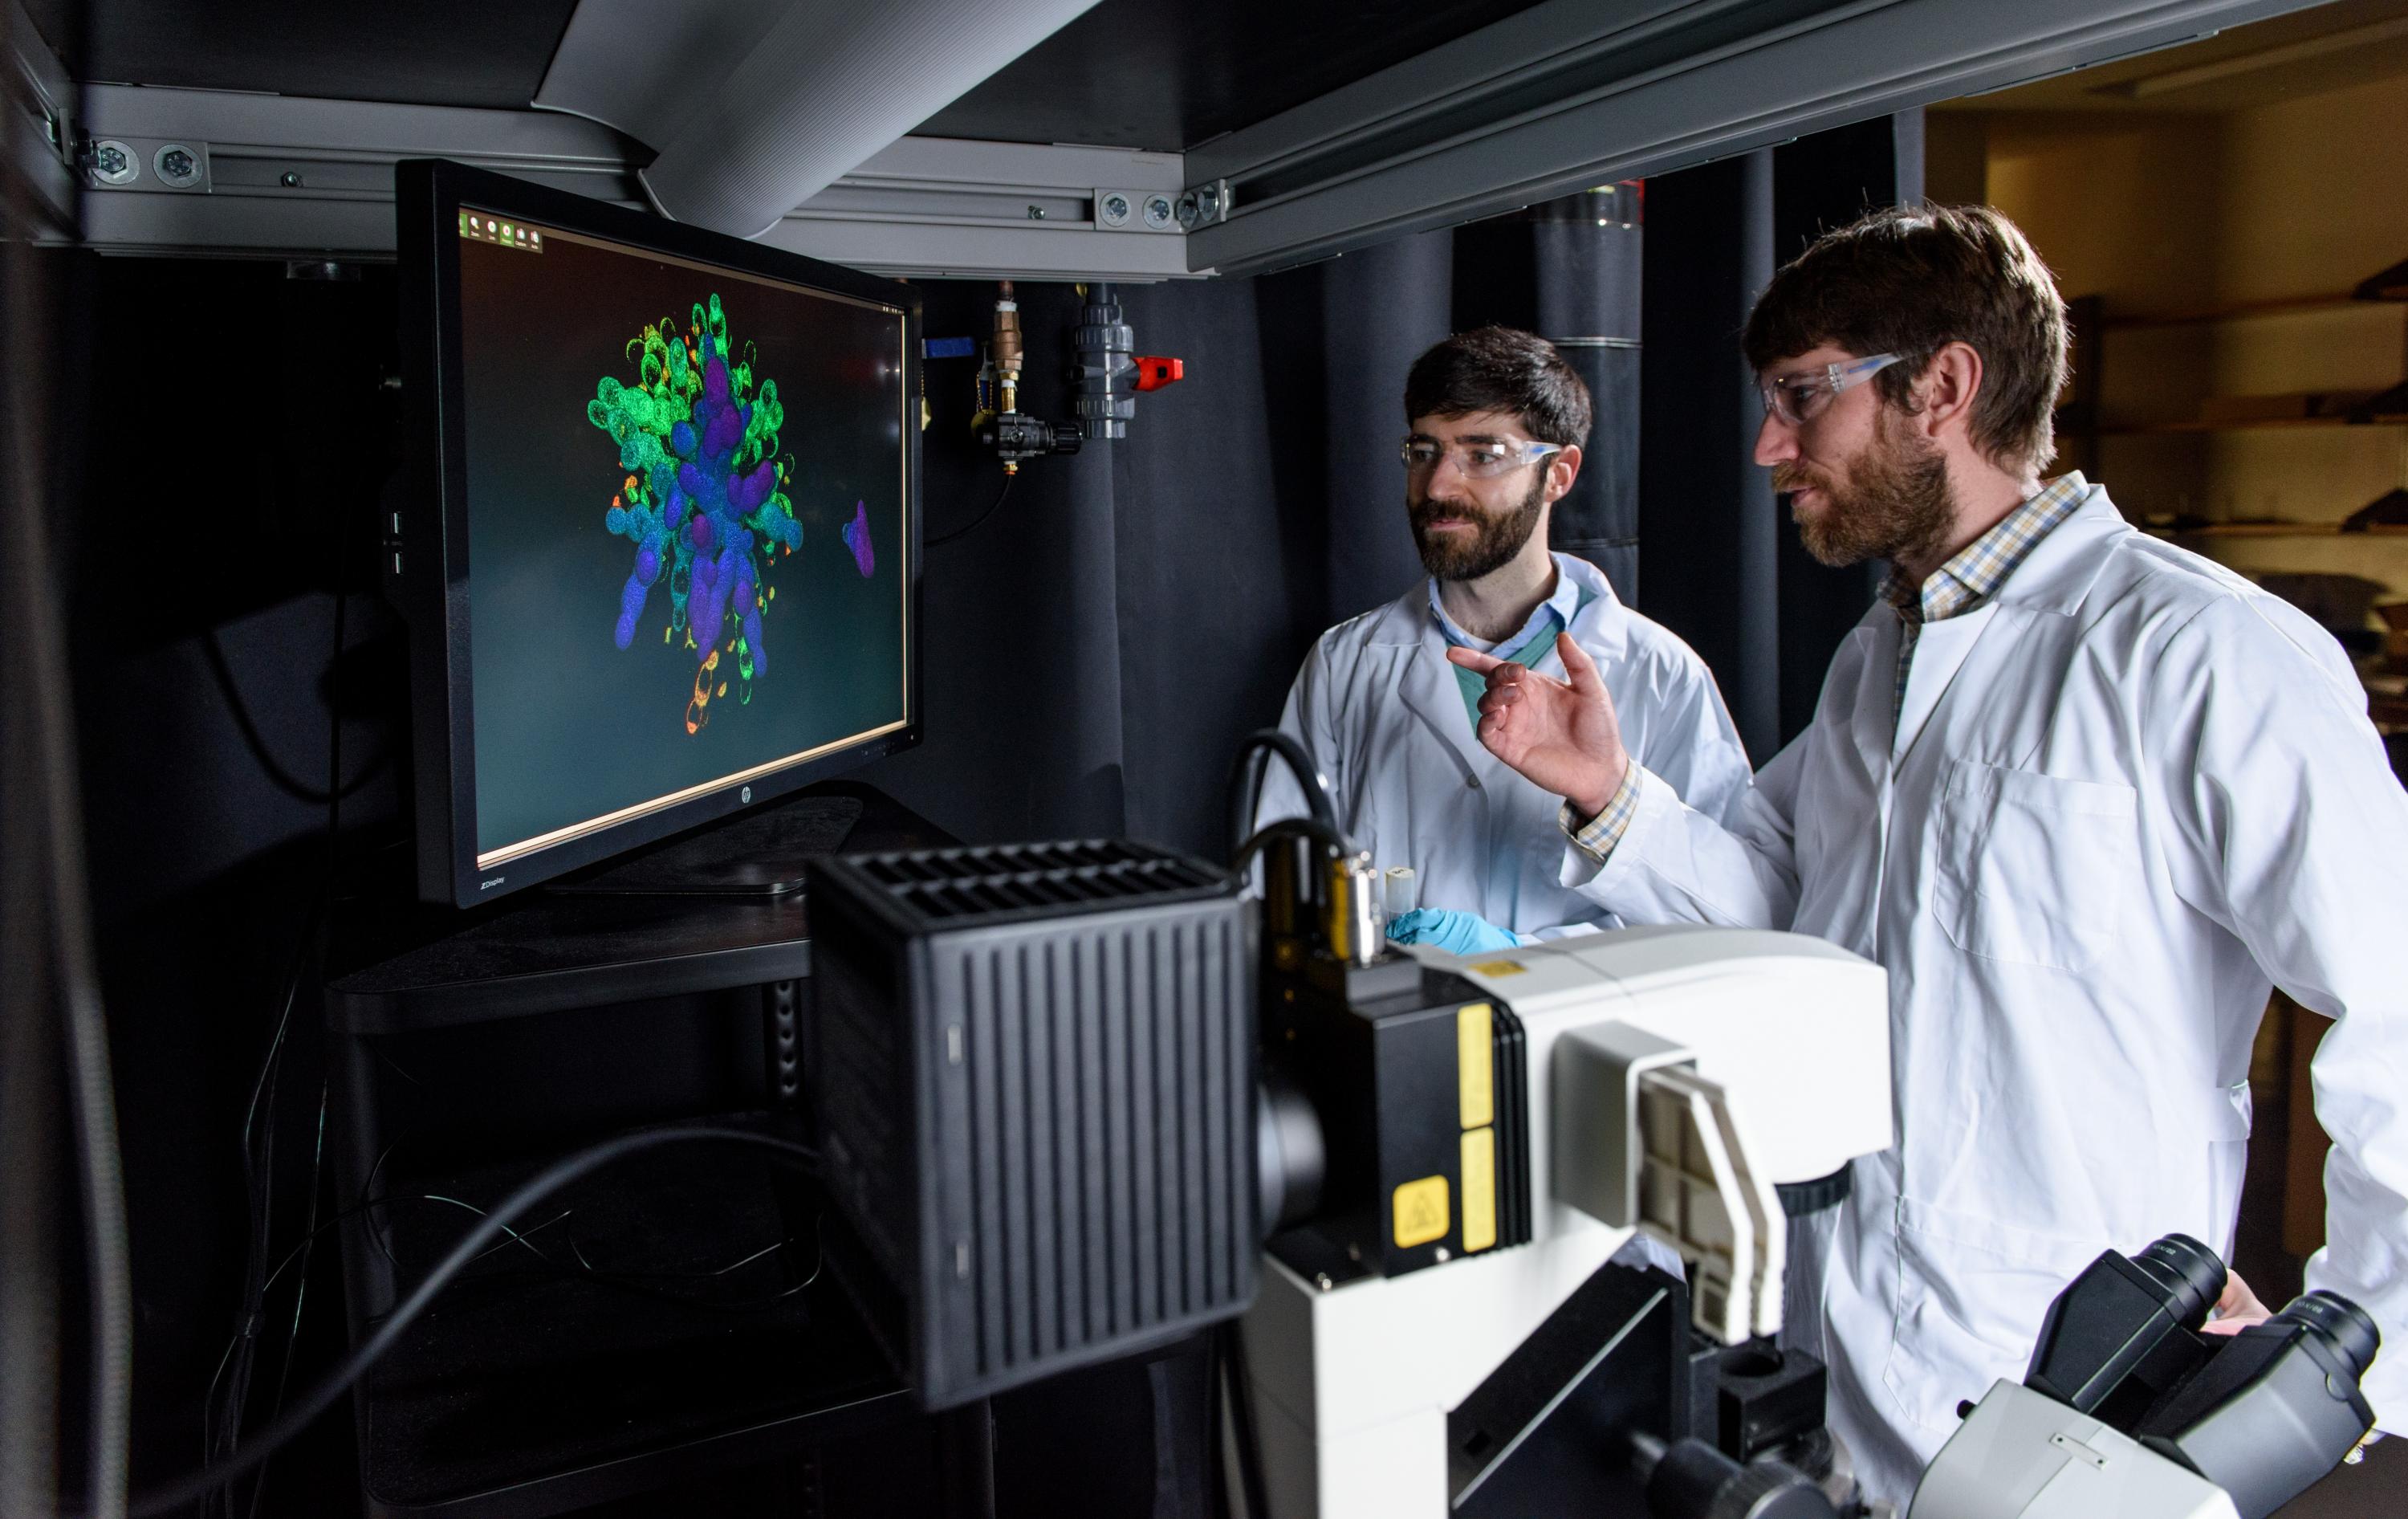 Physicist Peter Yunker and evolutionary biologist Will Ratcliff view a simulation of stresses on yeast snowflakes that cause it to have a lifecycle. Credit: Georgia Tech / Rob Felt